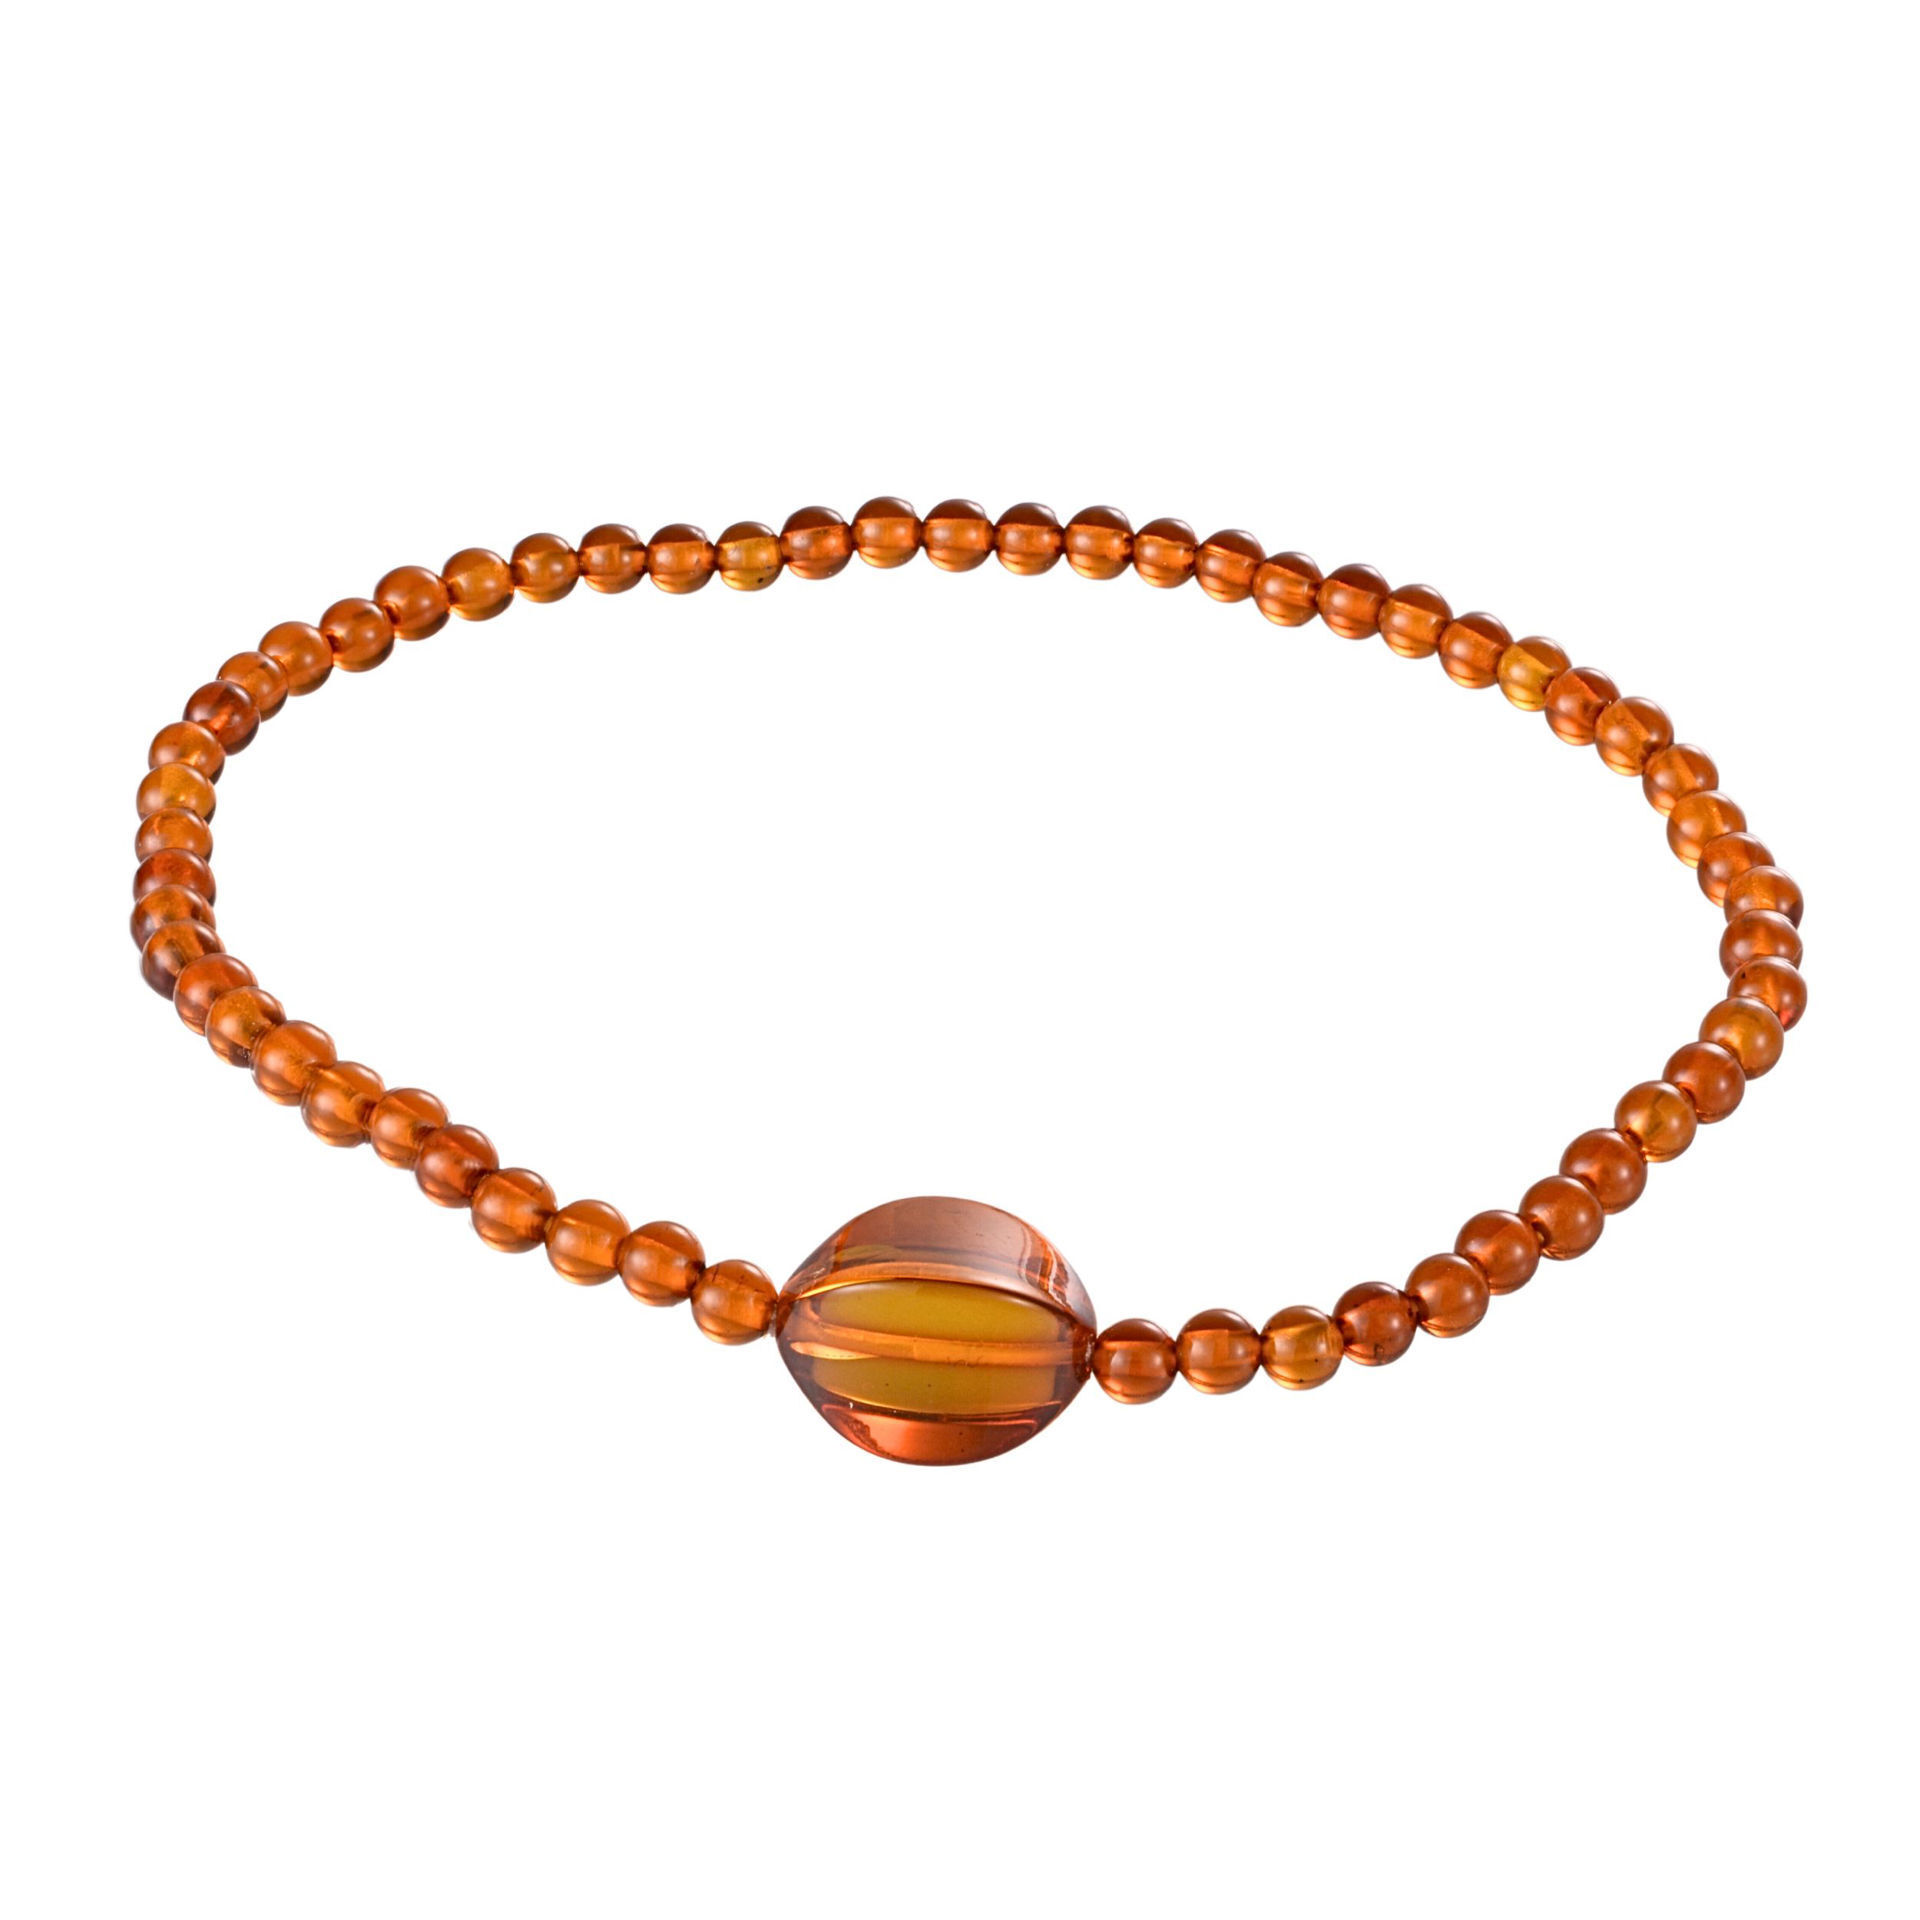 Amber Healing Necklace Made of Four Color Baroque Amber Beads.